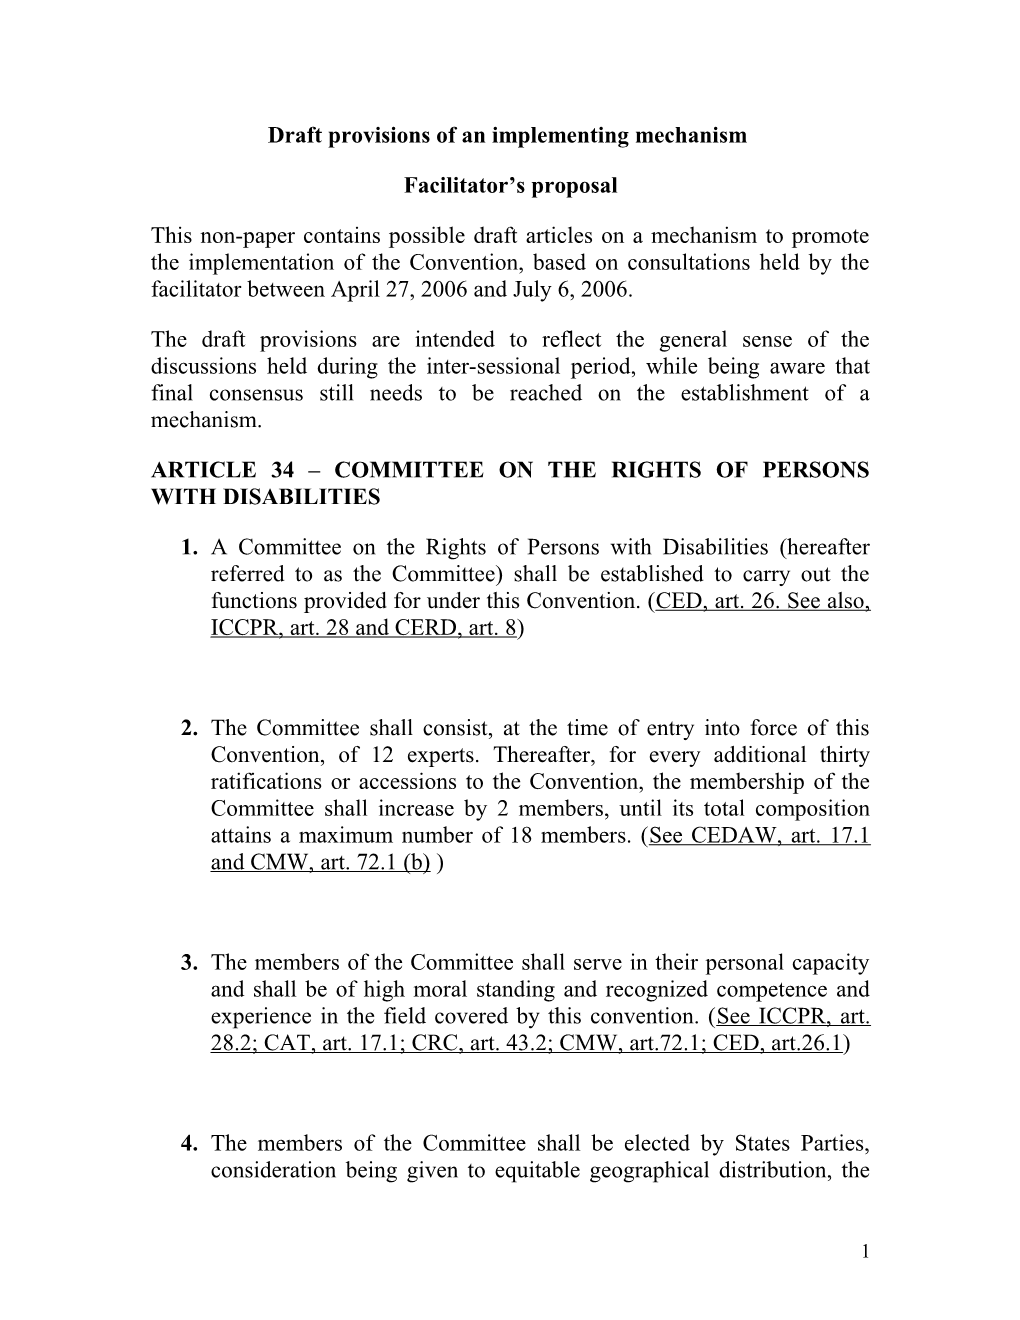 Draft Provisions of an Implementing Mechanism